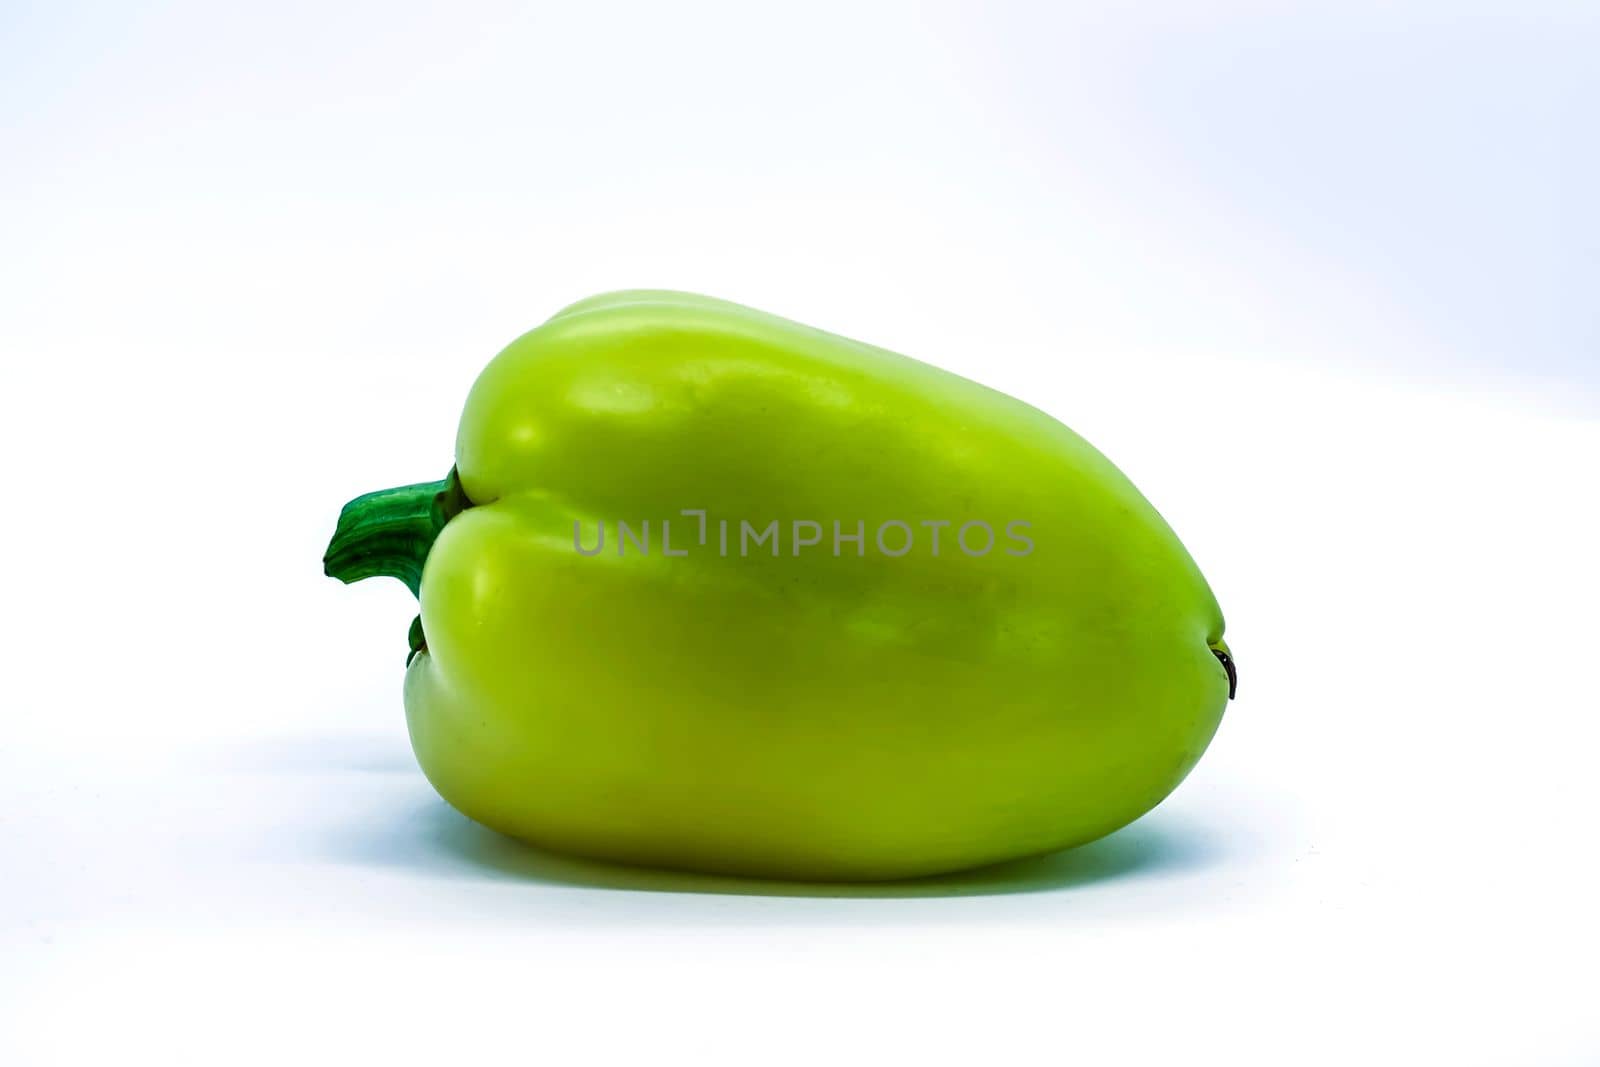 Green pepper on a white background close-up.